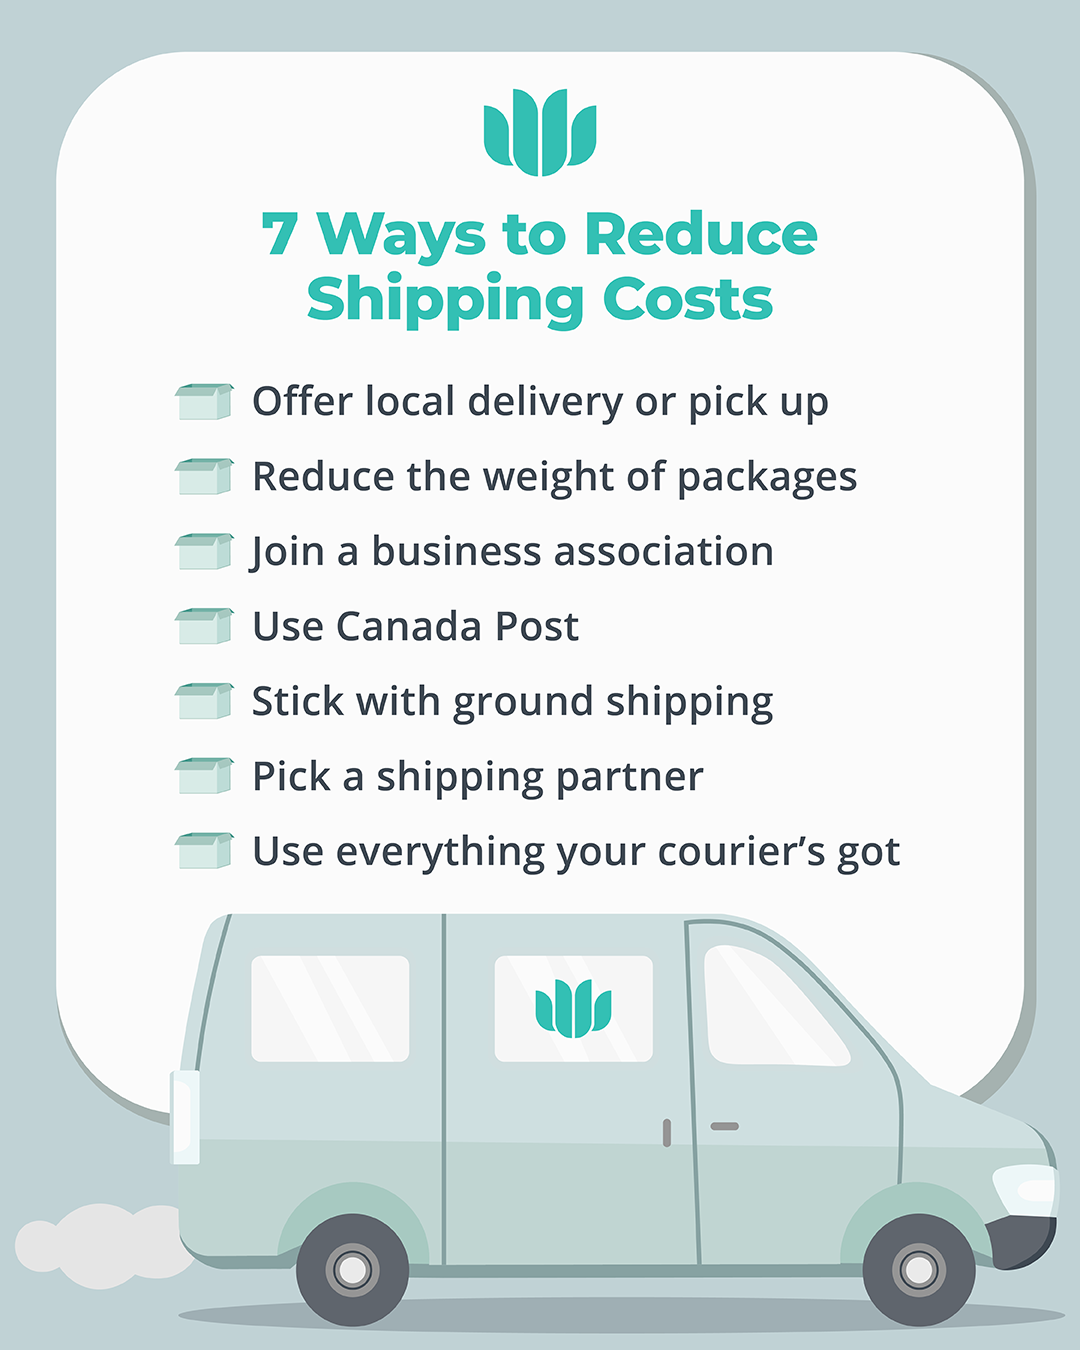 How to Reduce Shipping Costs as a Small Business